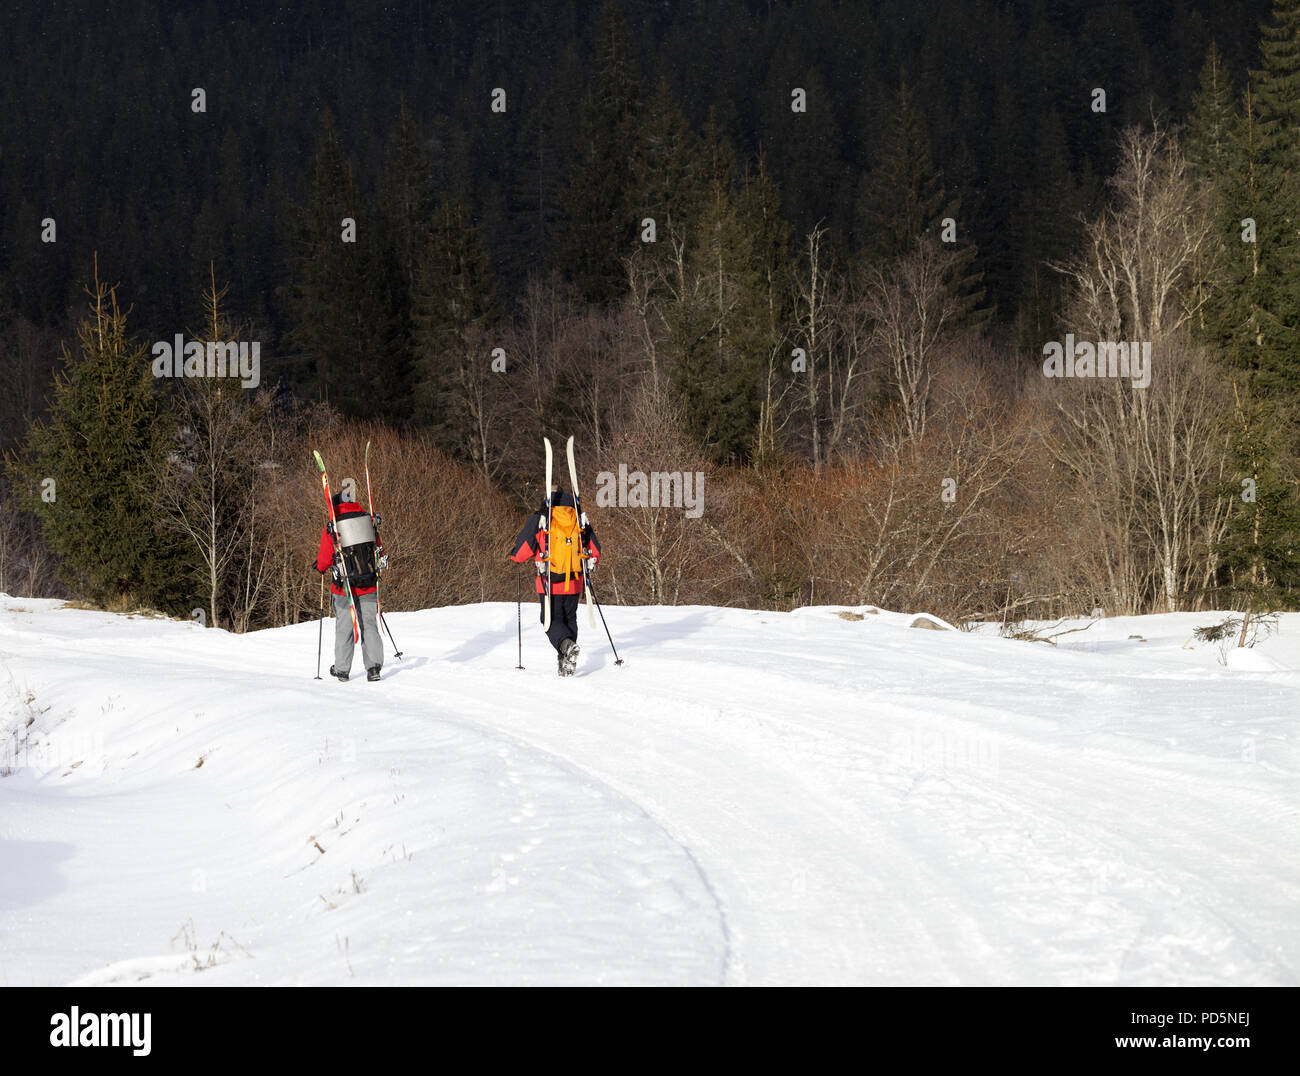 Two hikers with skis on backpack walk along snowy road in fir forest at sun winter day. Carpathian Mountains, Ukraine. Stock Photo